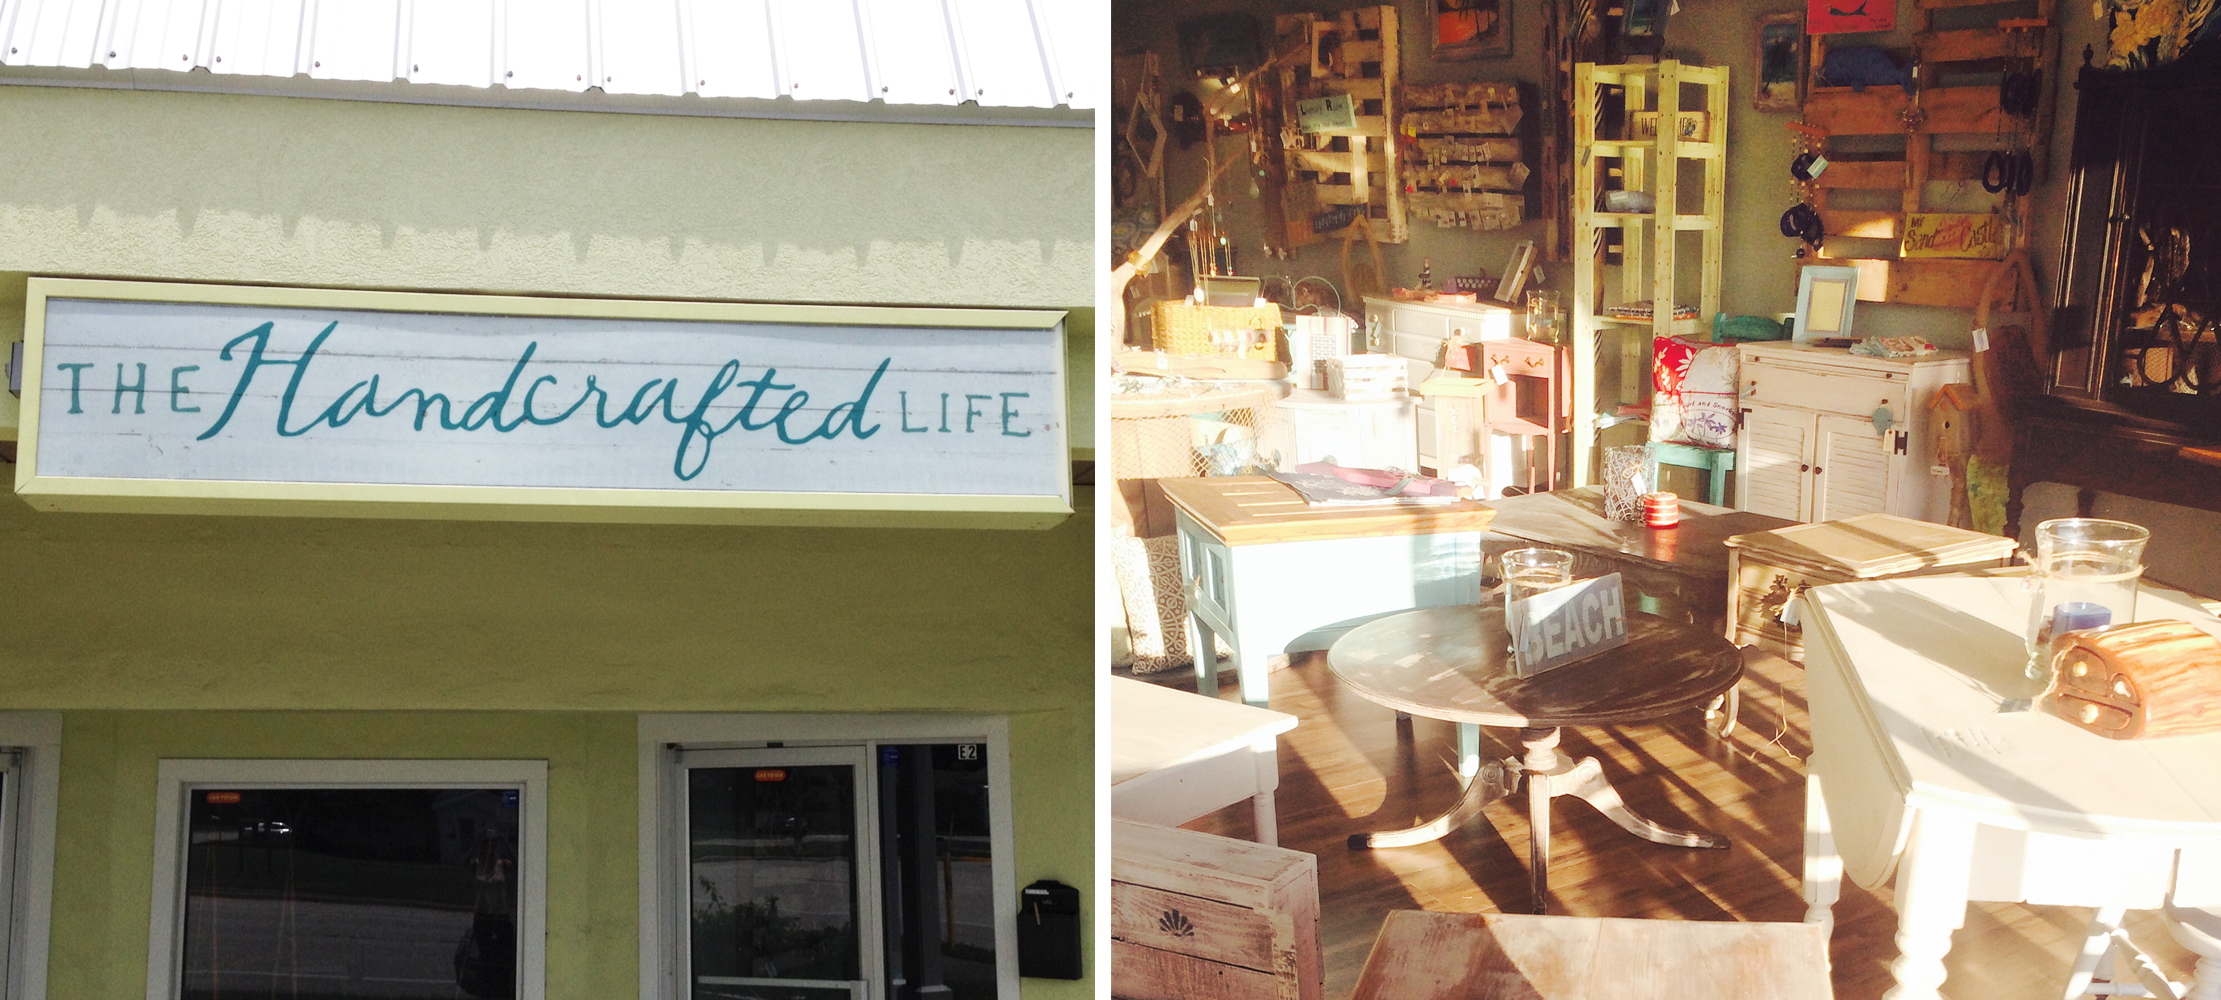 The Handcrafted Life Signage and Store Interior – Branding by Just Make Things